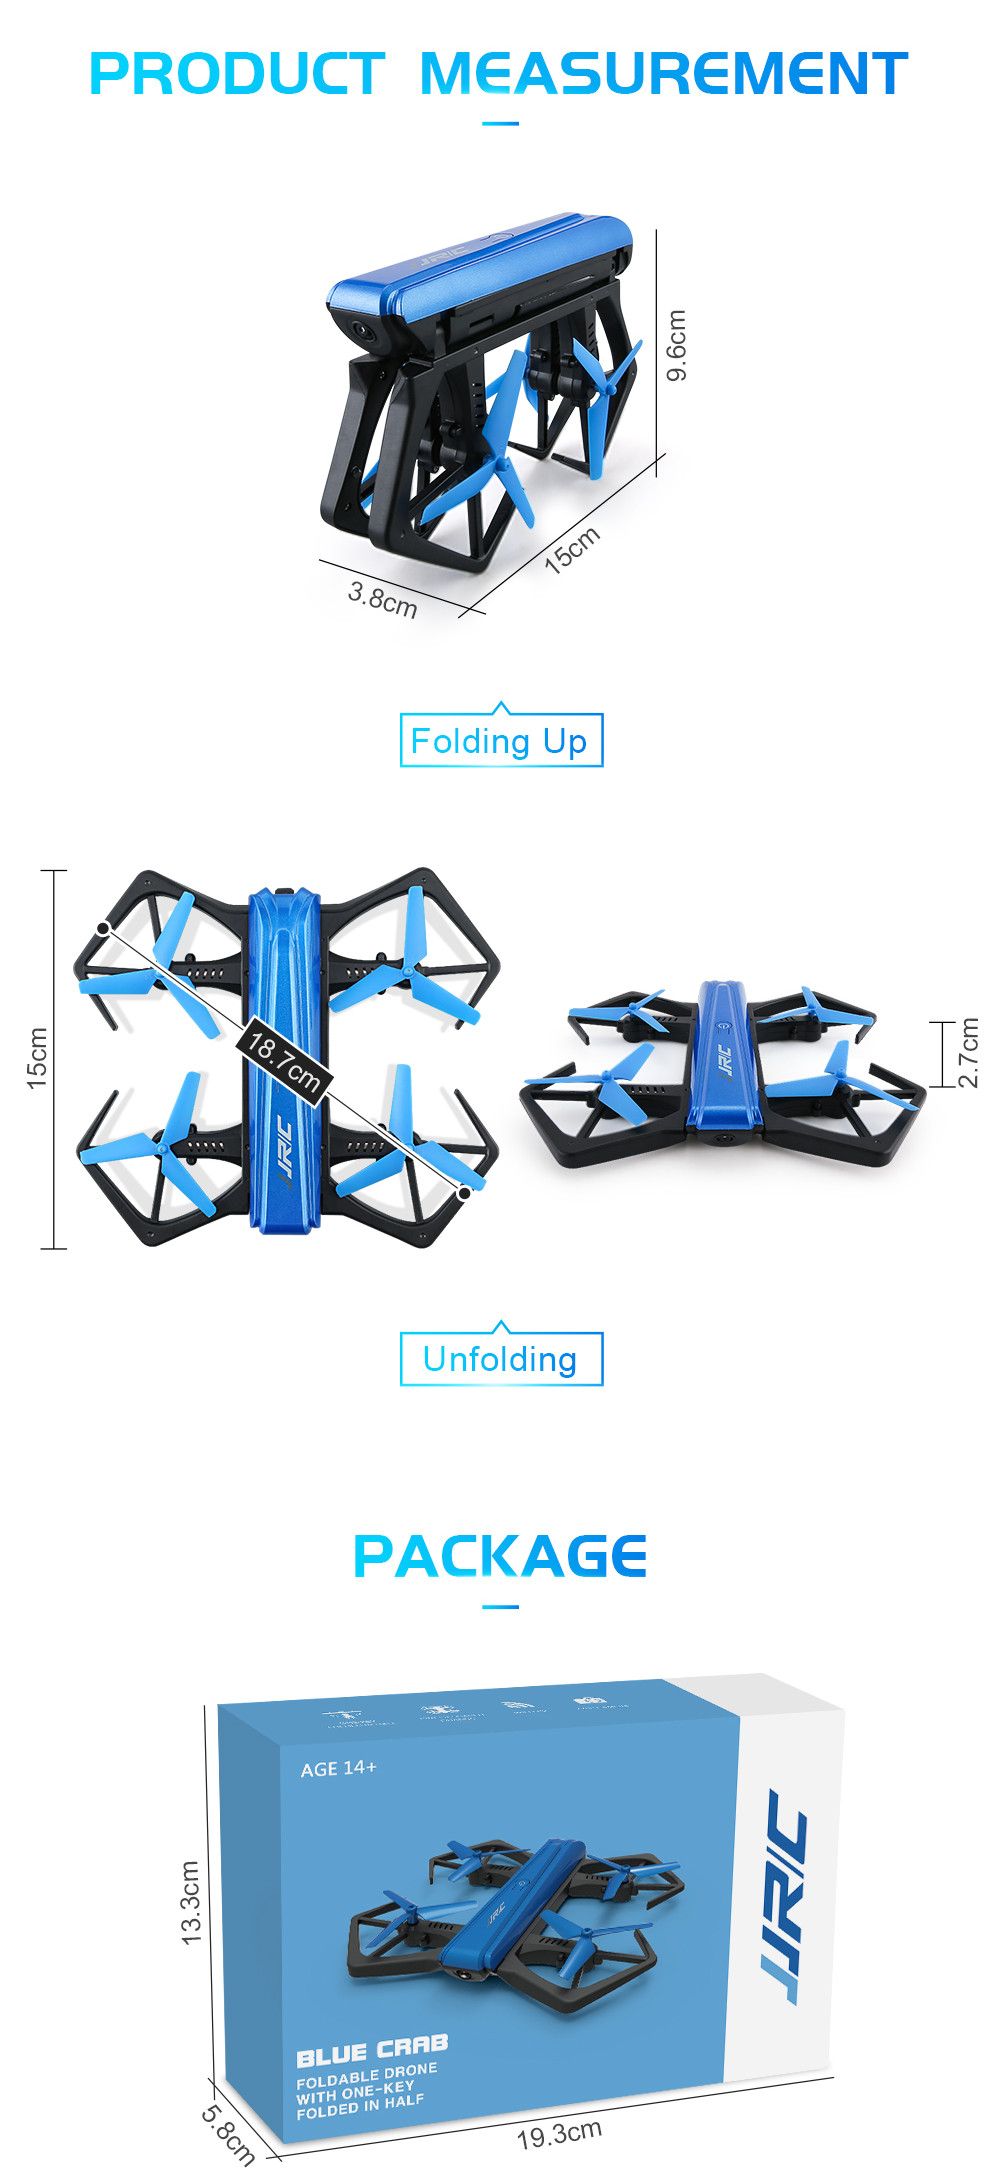 JJRC-H43WH-WIFI-FPV-With-720P-Camera-High-Hold-Mode-Foldable-Arm-RC-Drone-Quadcopter-1183011